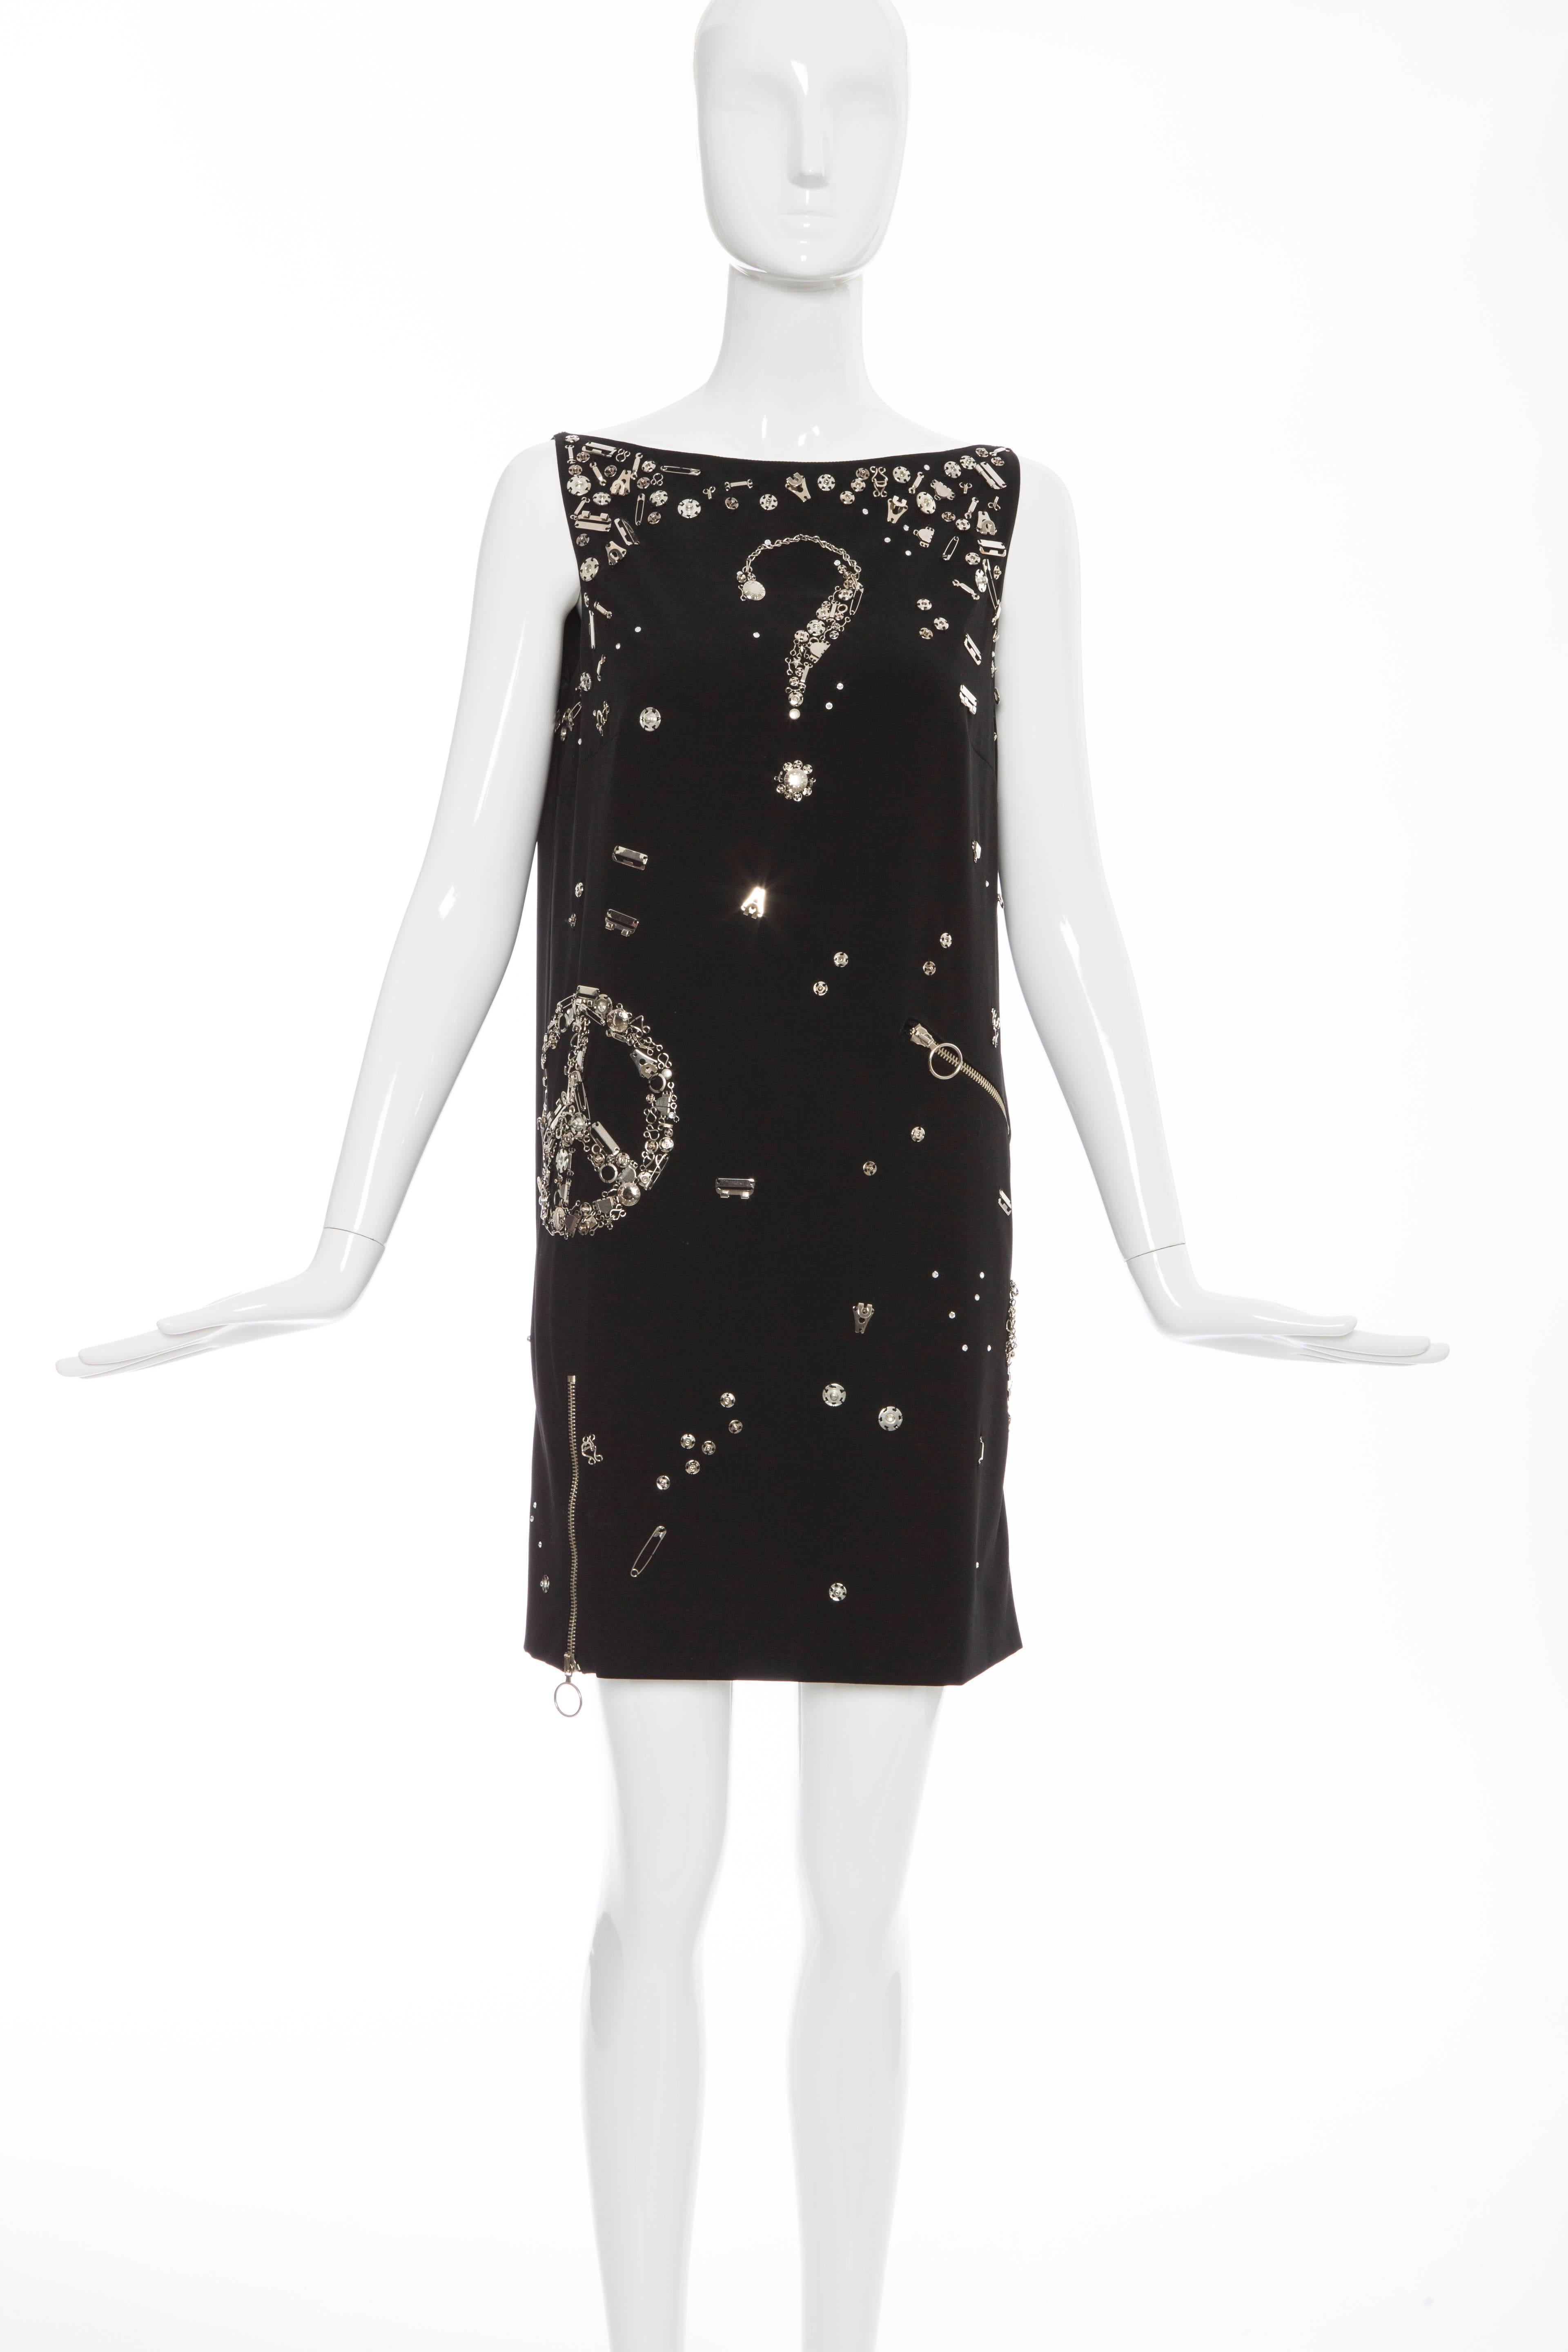 Moschino Couture, Fall 2009 black sleeveless safety pin embellished dress back zip and fully lined in silk.

US: 8, IT: 42, GB: 10

Bust: 35, Waist: 34, Hips 36, Length 32